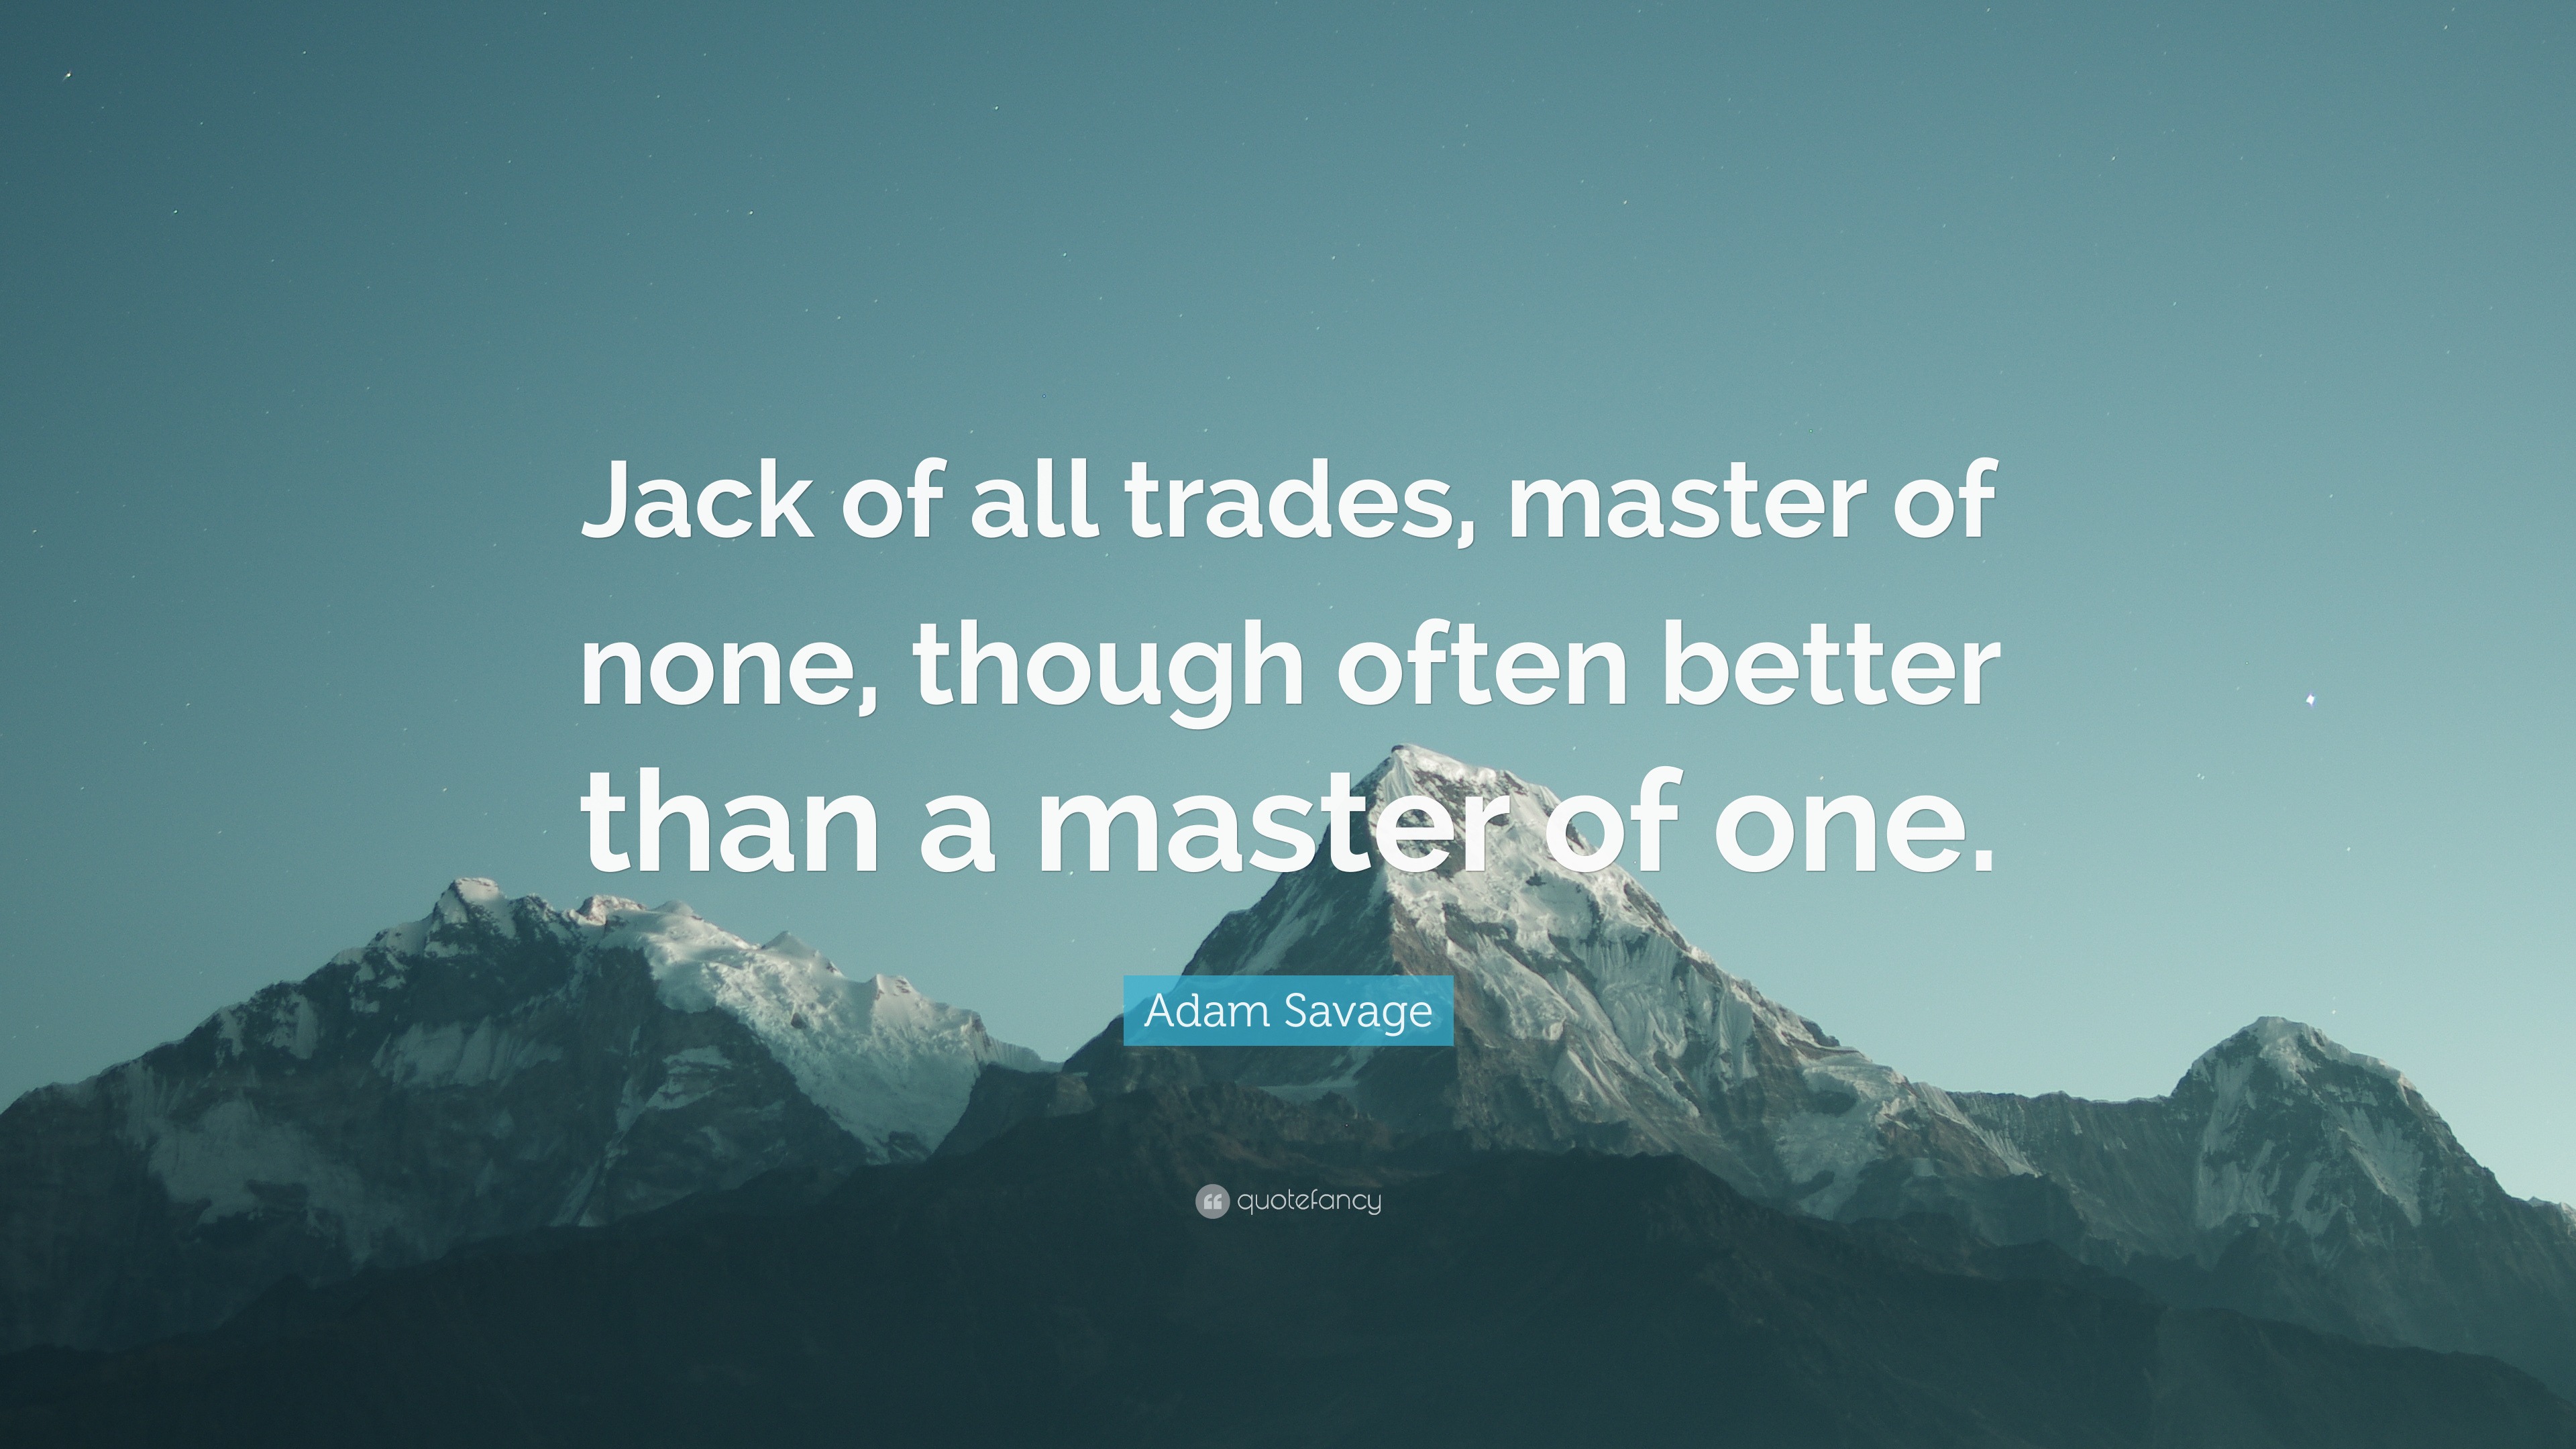 Adam Savage Quote: “Jack of all trades, master of none, though often better  than a master